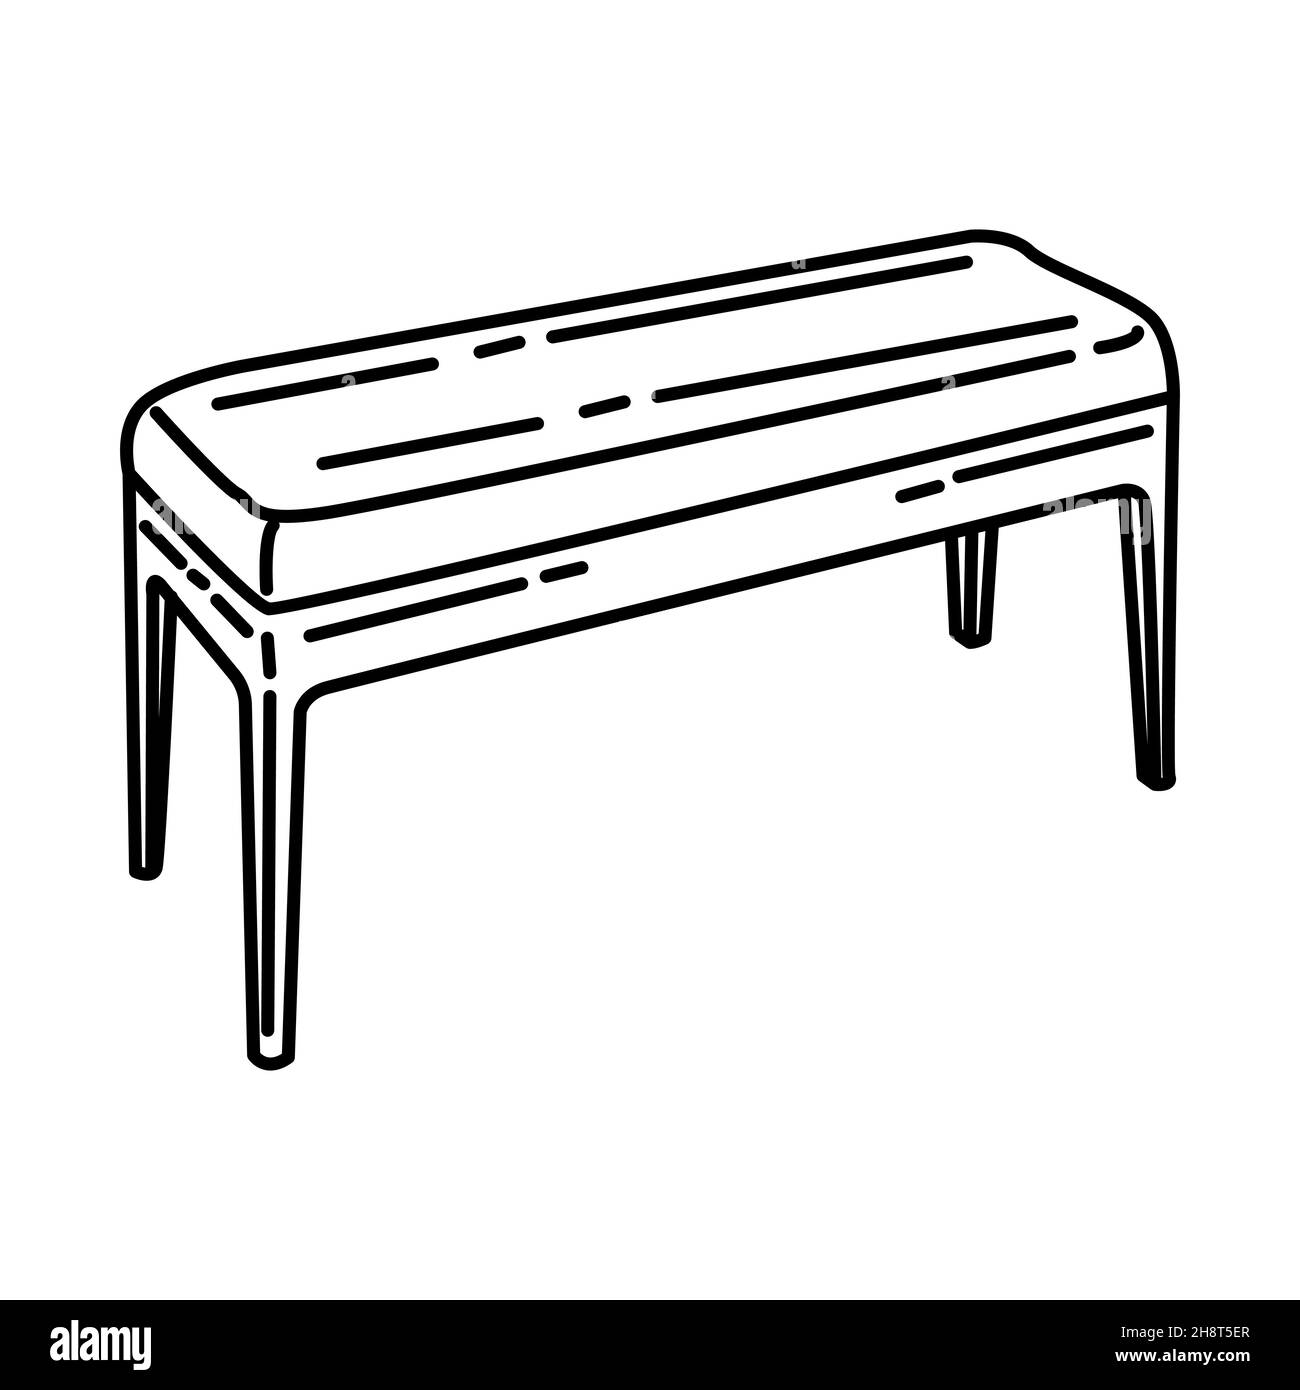 Upholstered bench Part of Furniture and Home Interior Hand Drawn Icon Set Vector. Stock Vector